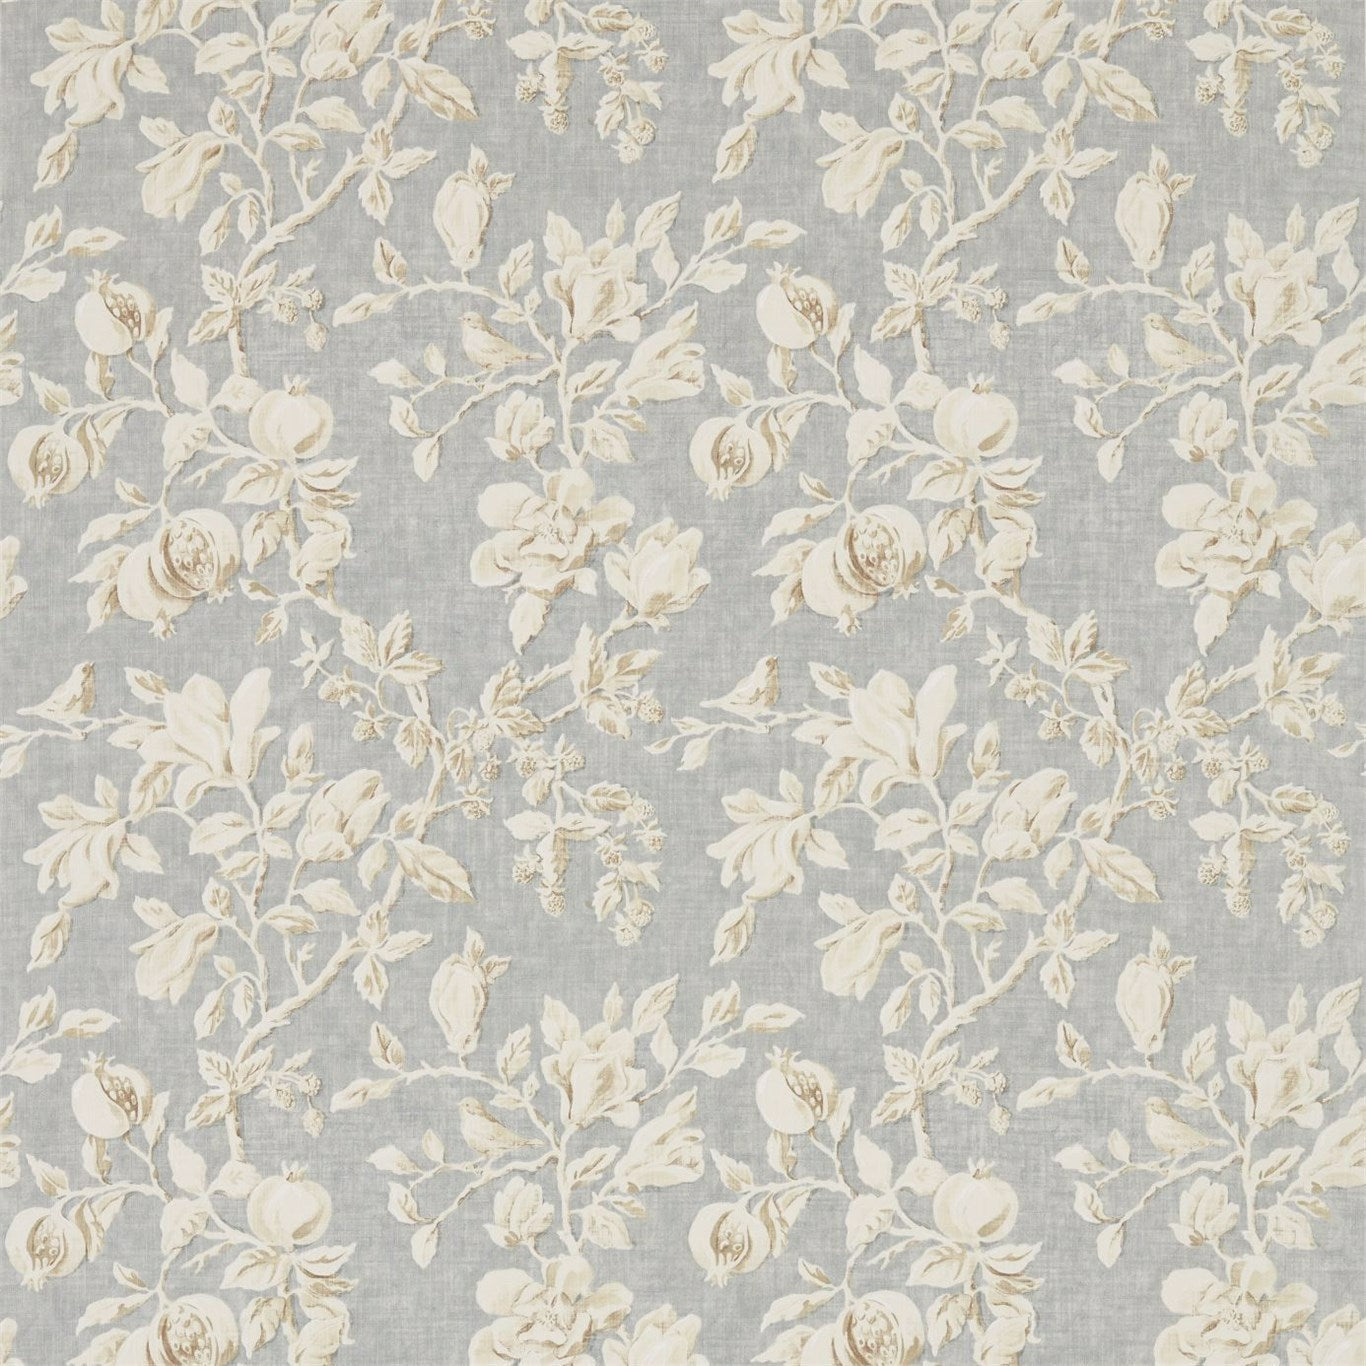 Magnolia and Pomegranate Grey Blue/Parchment Fabric By Sanderson